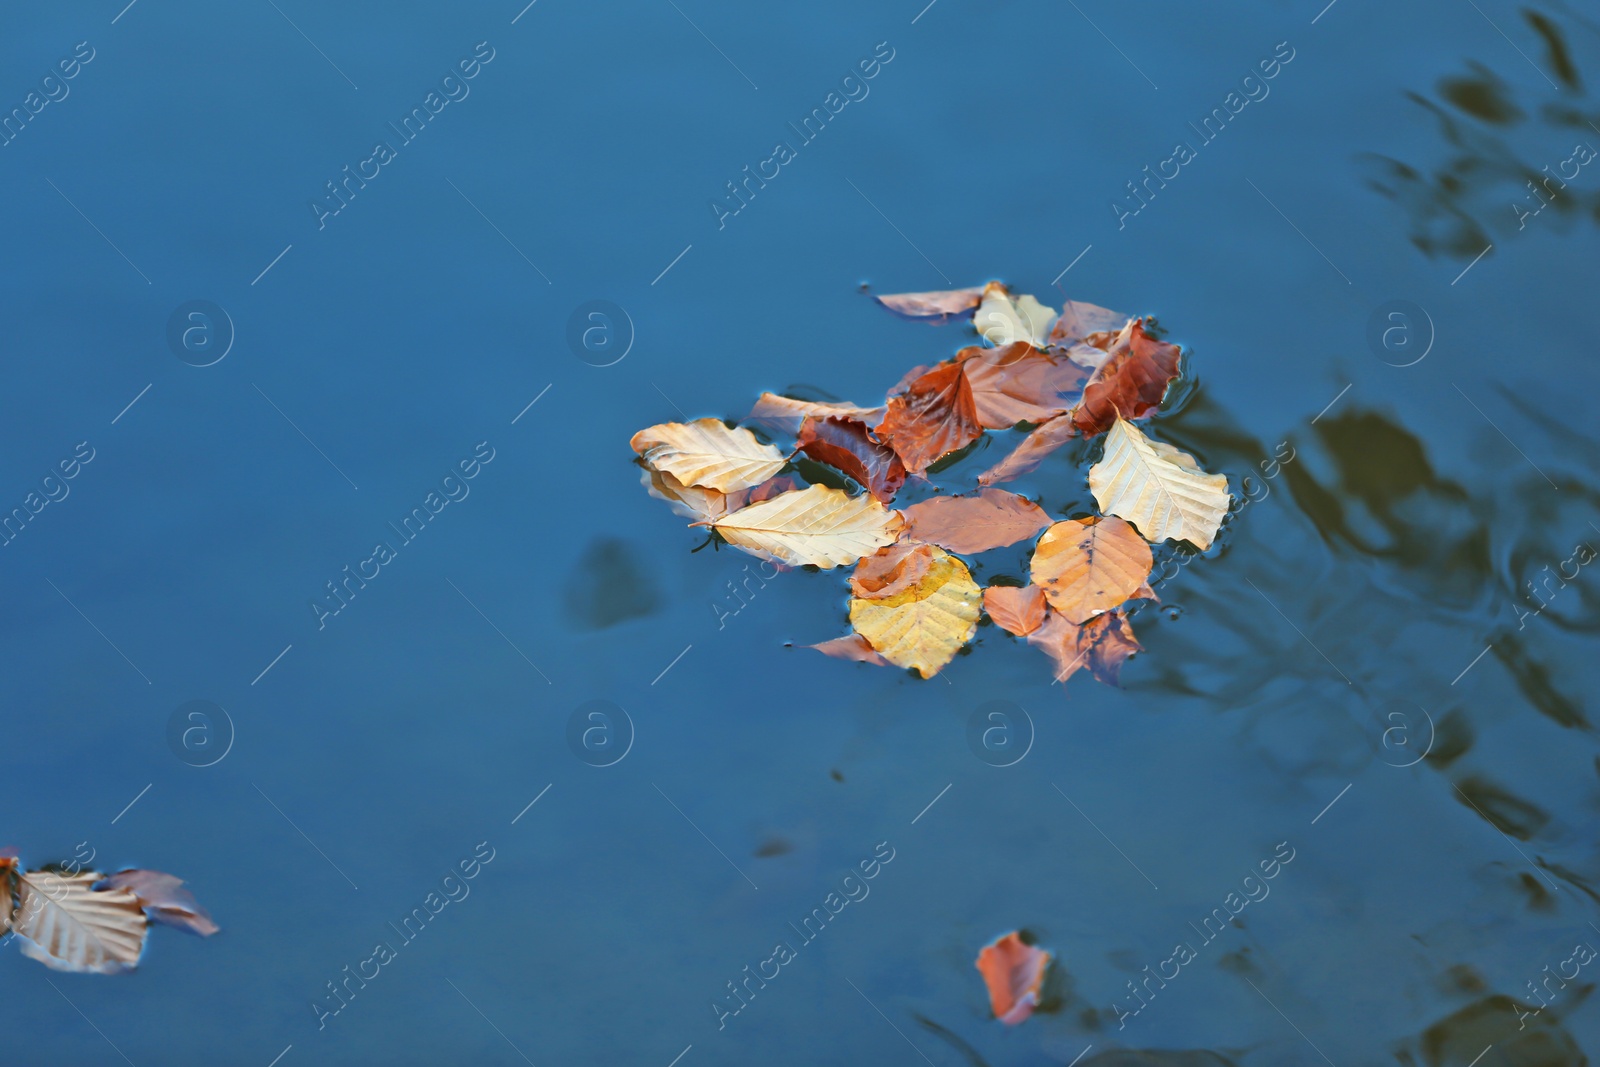 Photo of Fallen autumn leaves on surface of water, outdoors